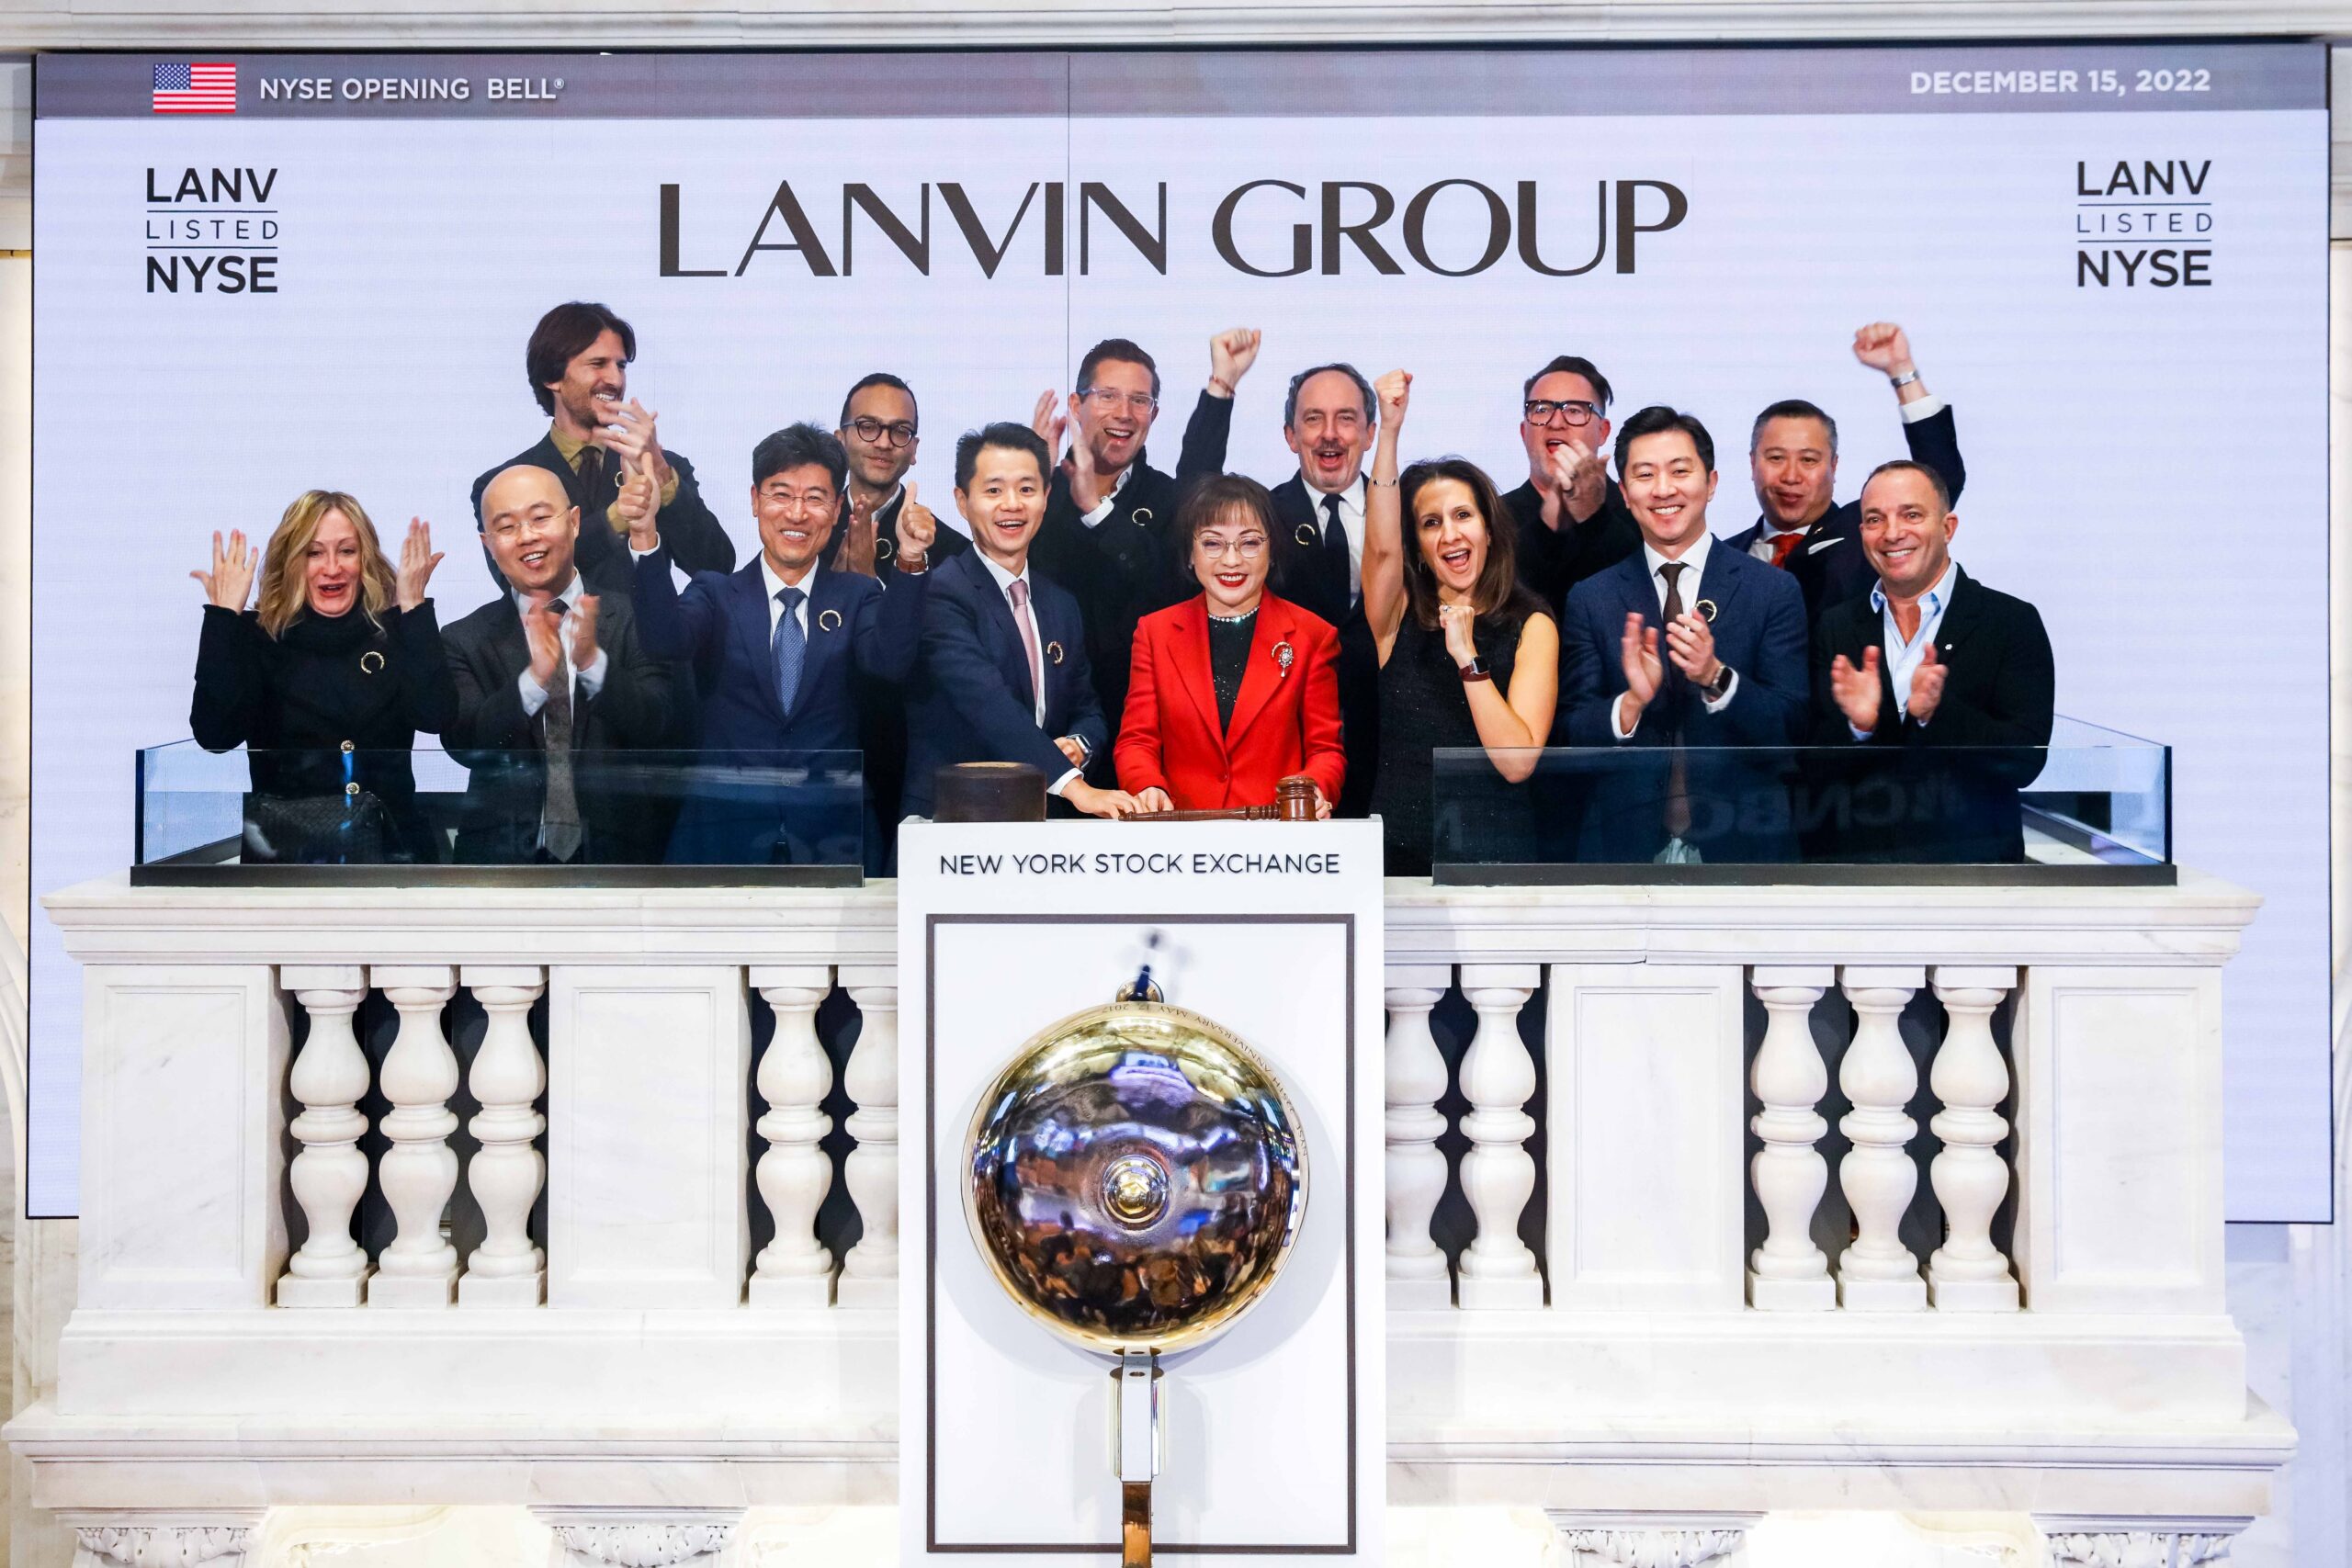 First Global Luxury Group Based in Asia! Lanvin Group Officially Listed on the New York Stock Exchange